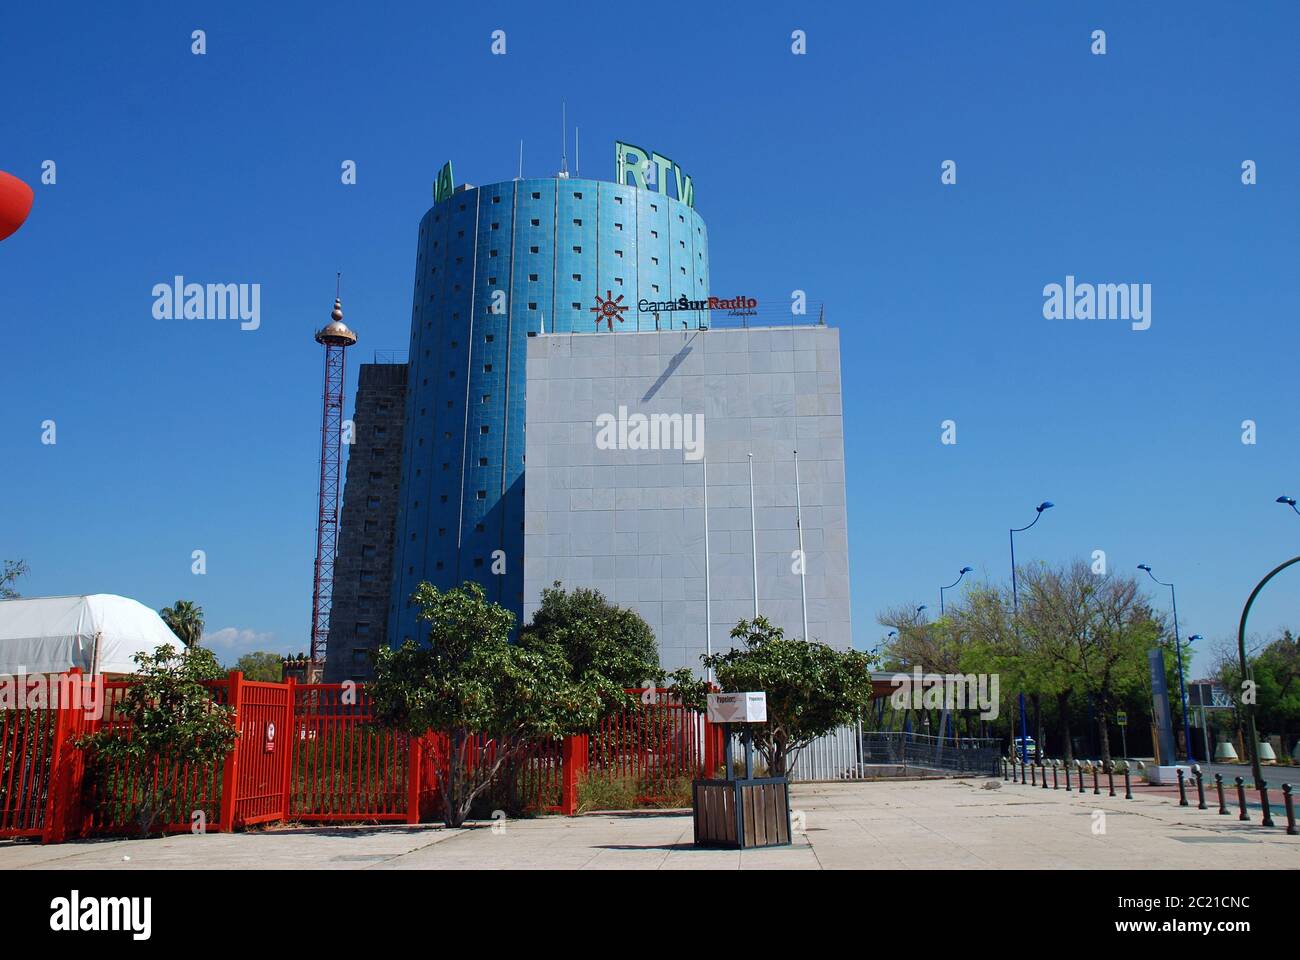 The RTVA (Radio and Television of Andalucia) studios on the Isla Cartuja in Seville, Spain on April 3, 2019. Stock Photo